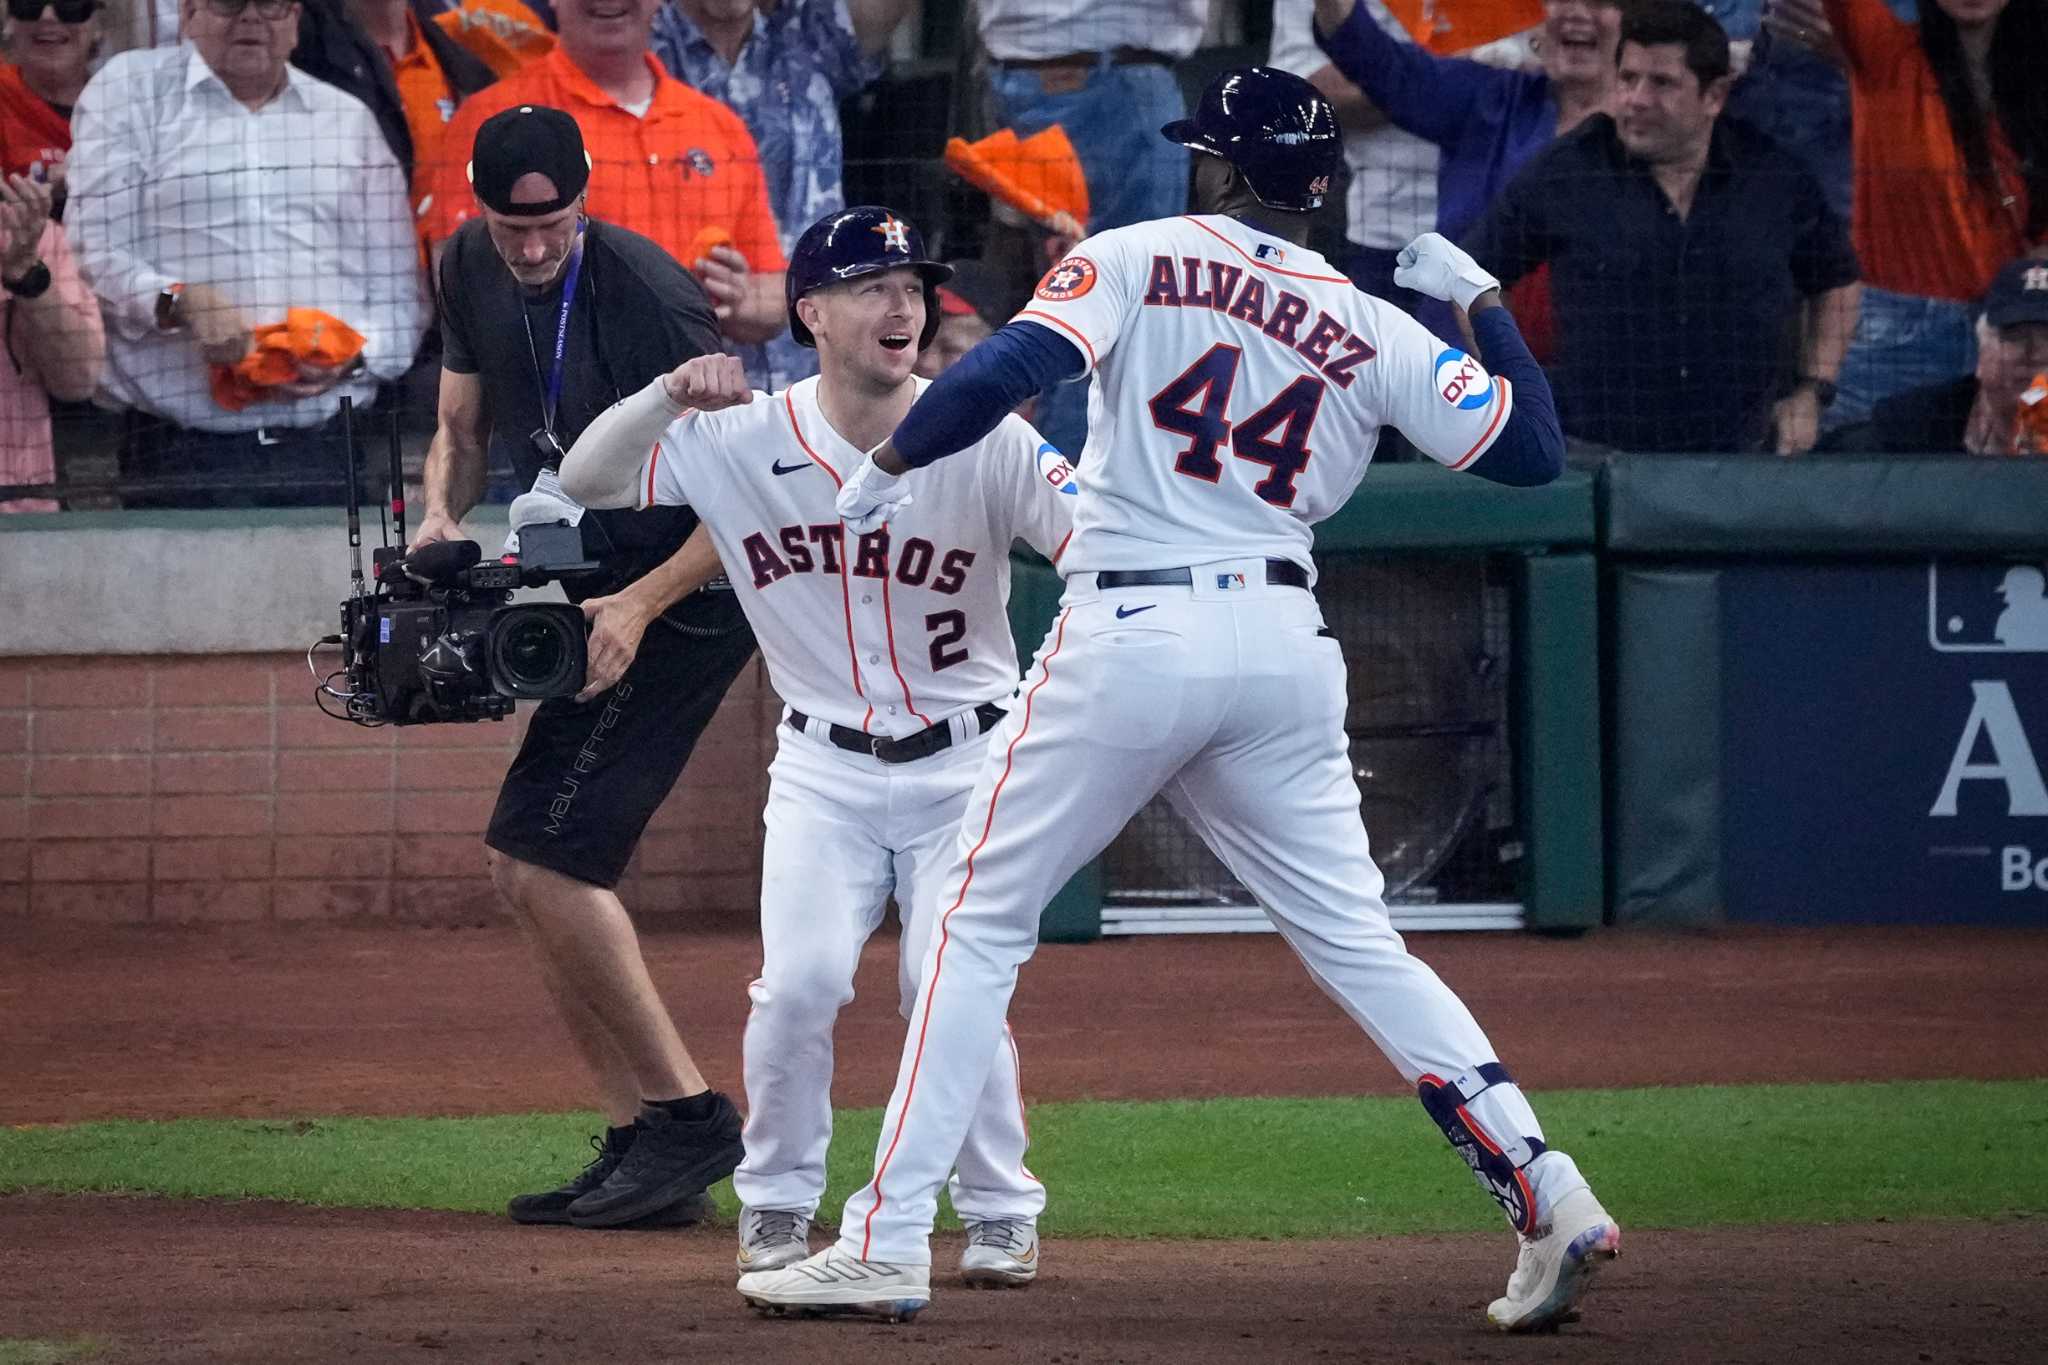 Astros 6, Twins 4: How Houston took Game 1 of the ALDS